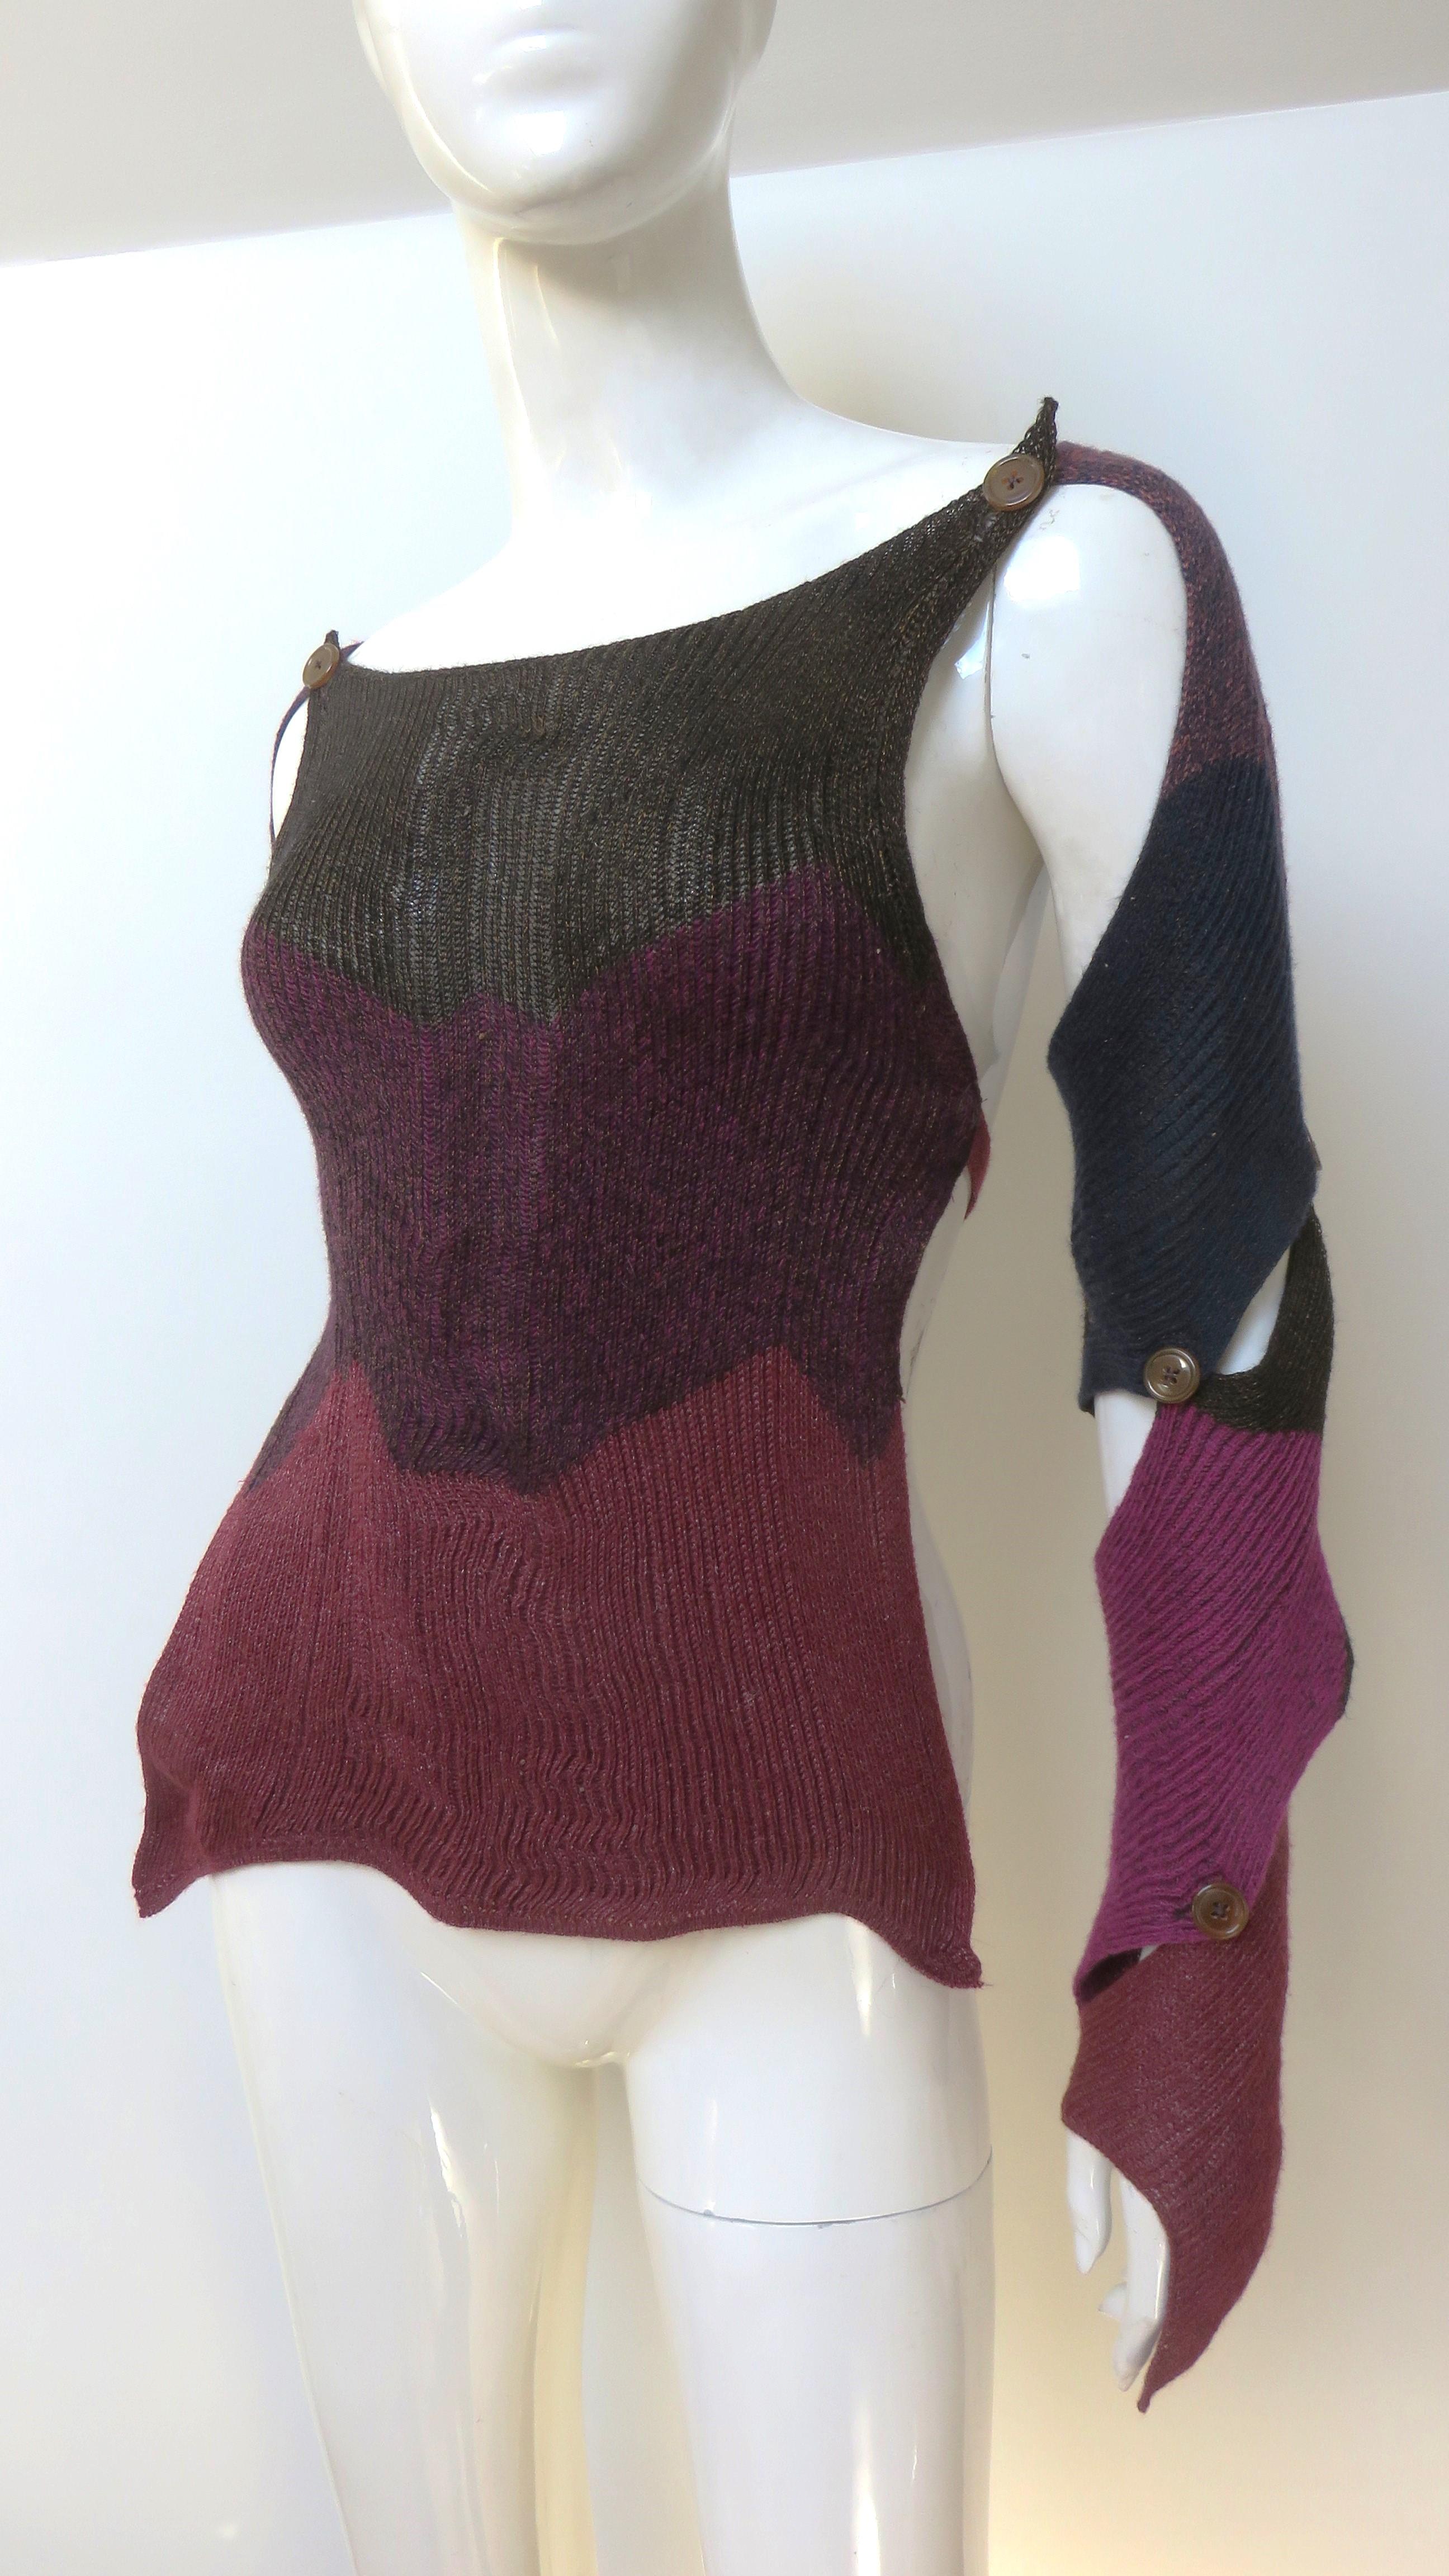 This a a fabulous unique wool sweater or sweater vest in horizontal color swaths of blue, burgundy, and brown highlighted with with a subtle shiny thread by Vivienne Westwood.  It is backless with the exception of a panel across the upper back and a